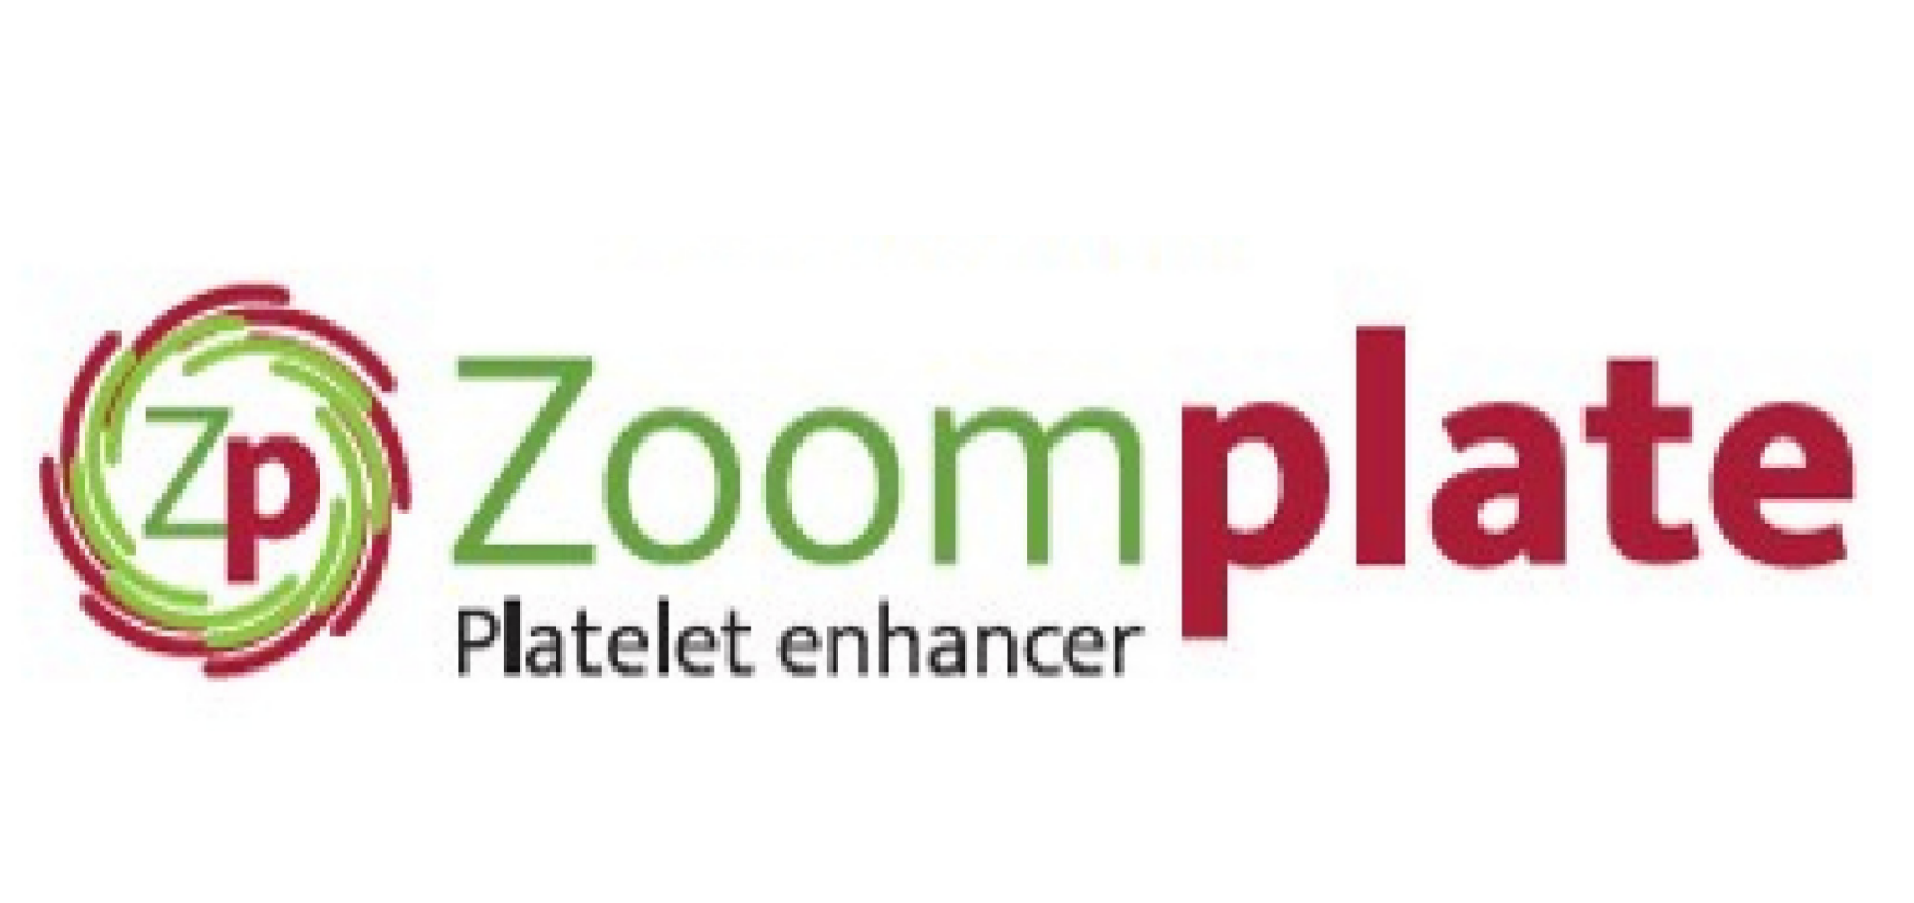 Zoomplate